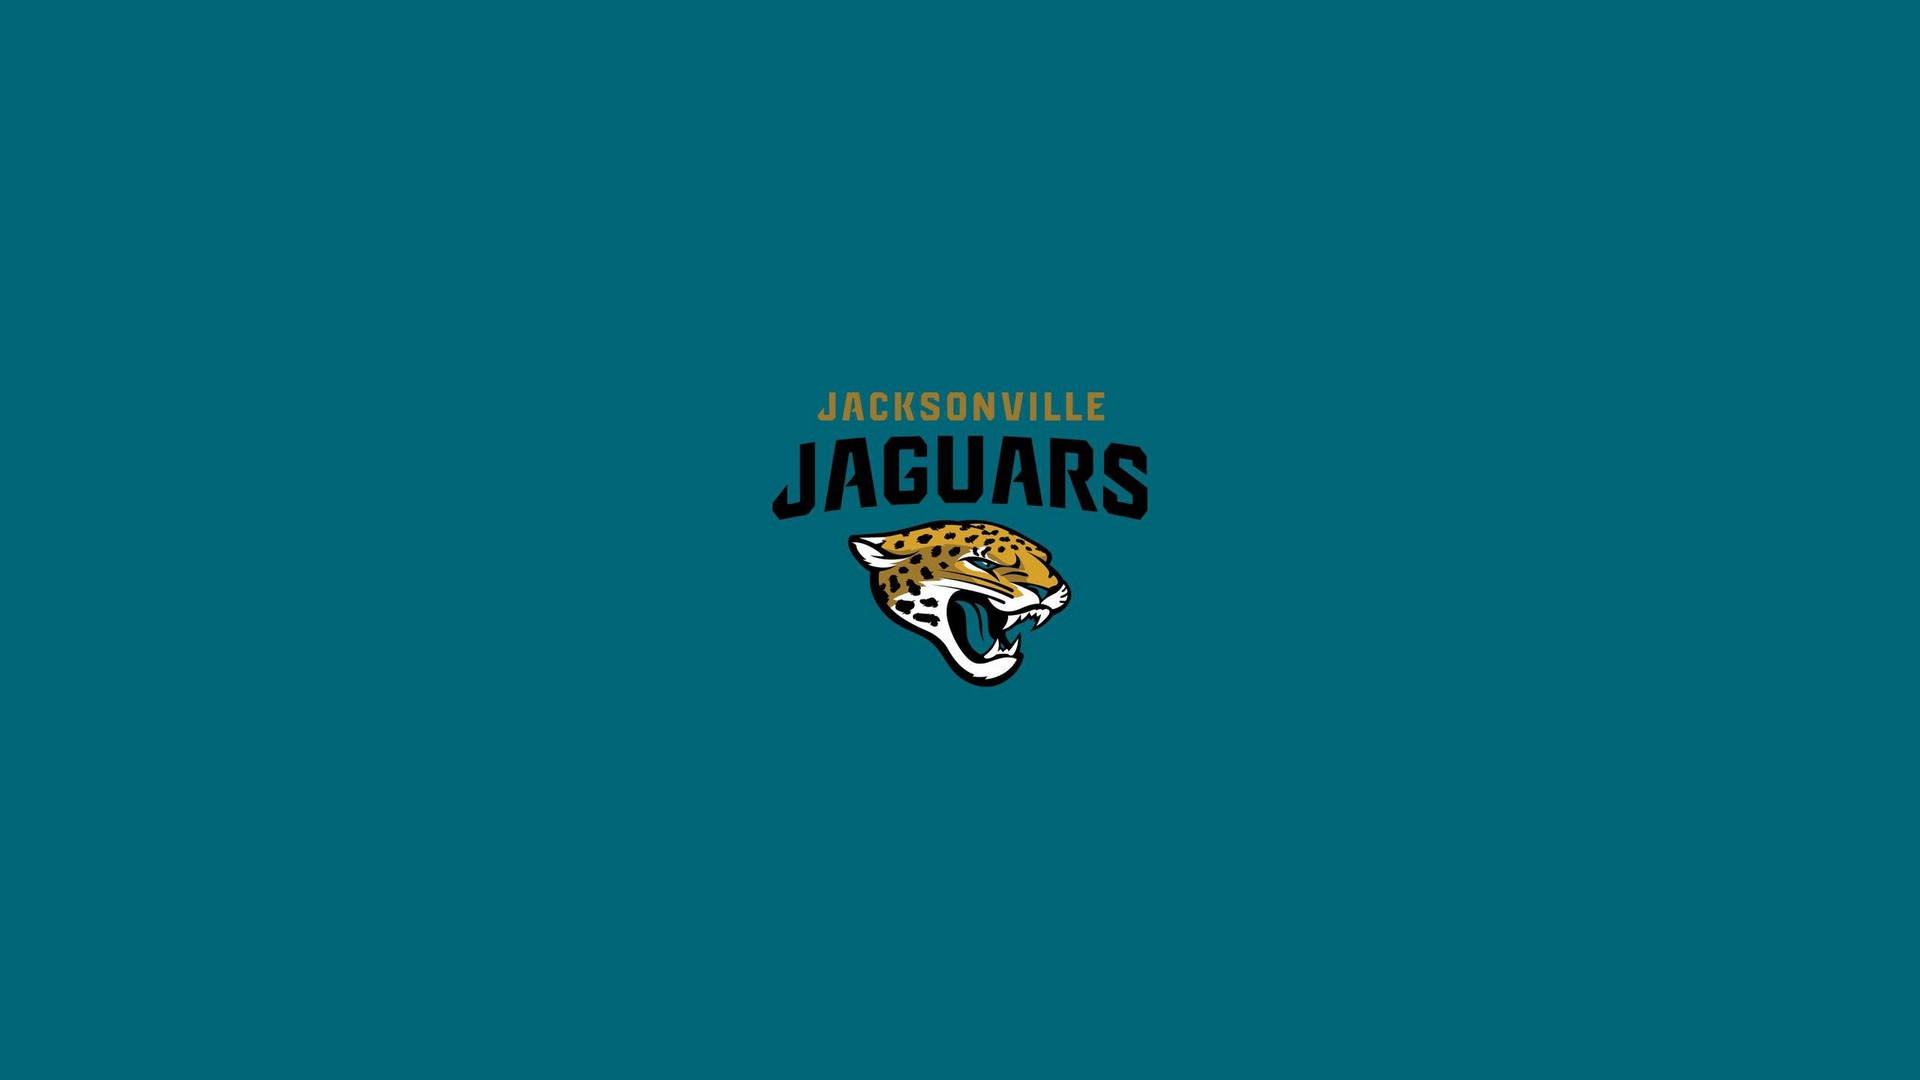 Wallpaper Desktop Jacksonville Jaguars NFL HD with high-resolution 1920x1080 pixel. You can use this wallpaper for your Mac or Windows Desktop Background, iPhone, Android or Tablet and another Smartphone device